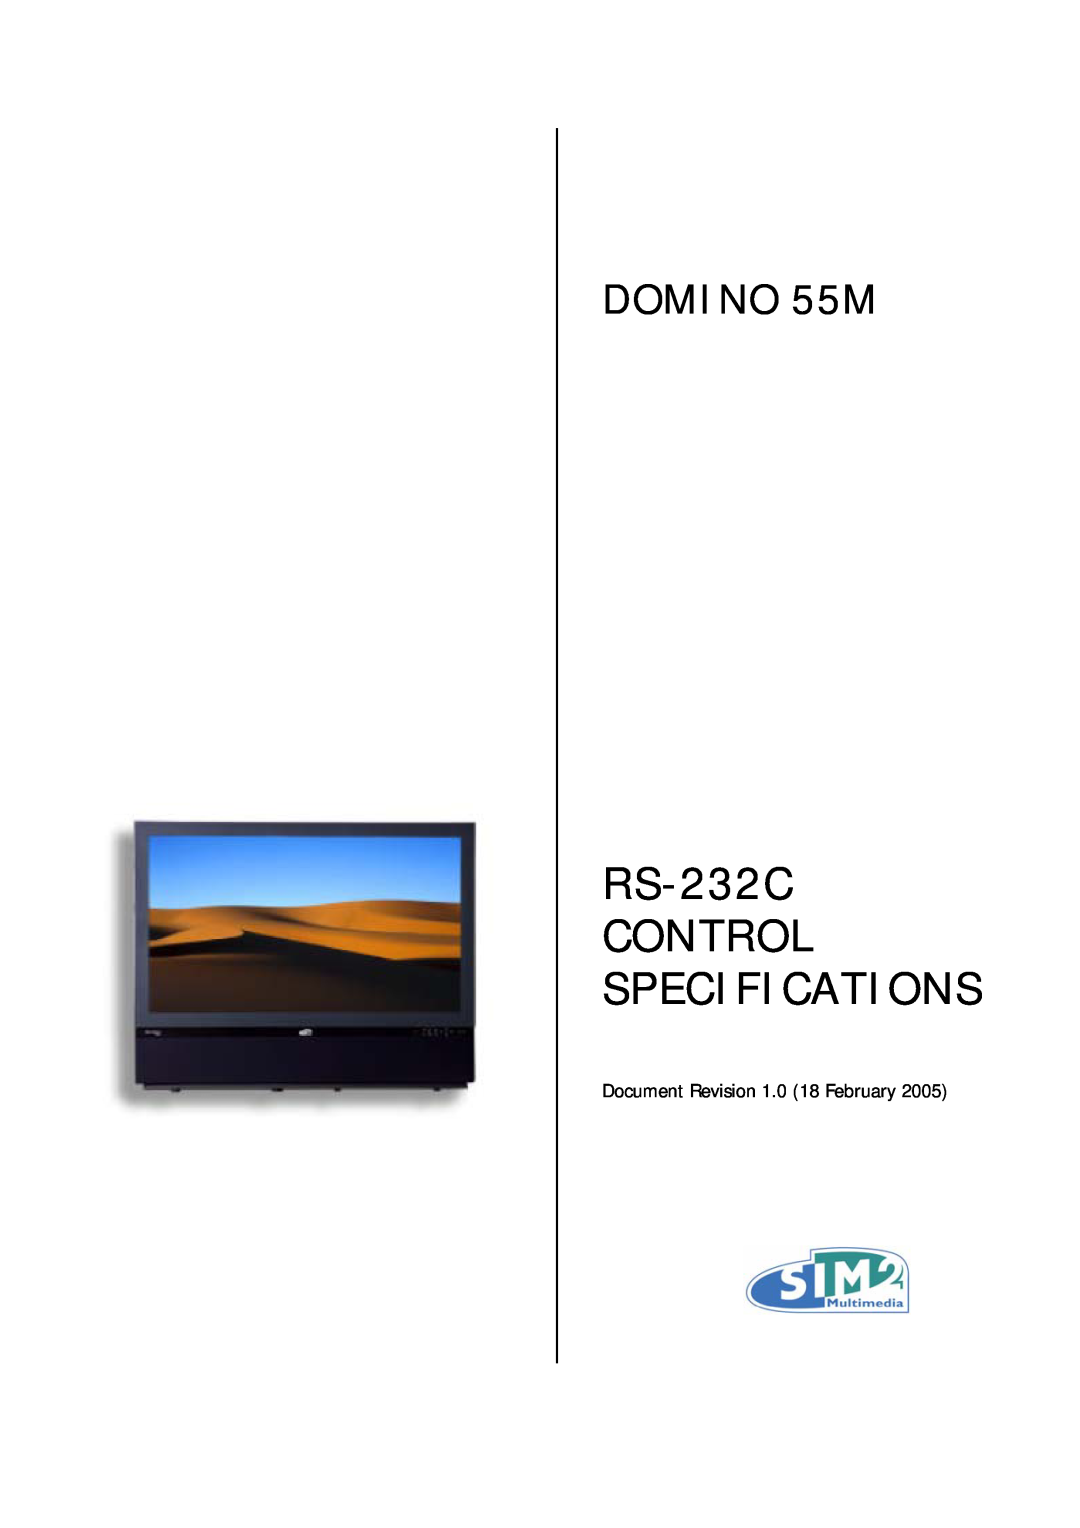 Sim2 Multimedia specifications RS-232C CONTROL SPECIFICATIONS, DOMINO 55M 